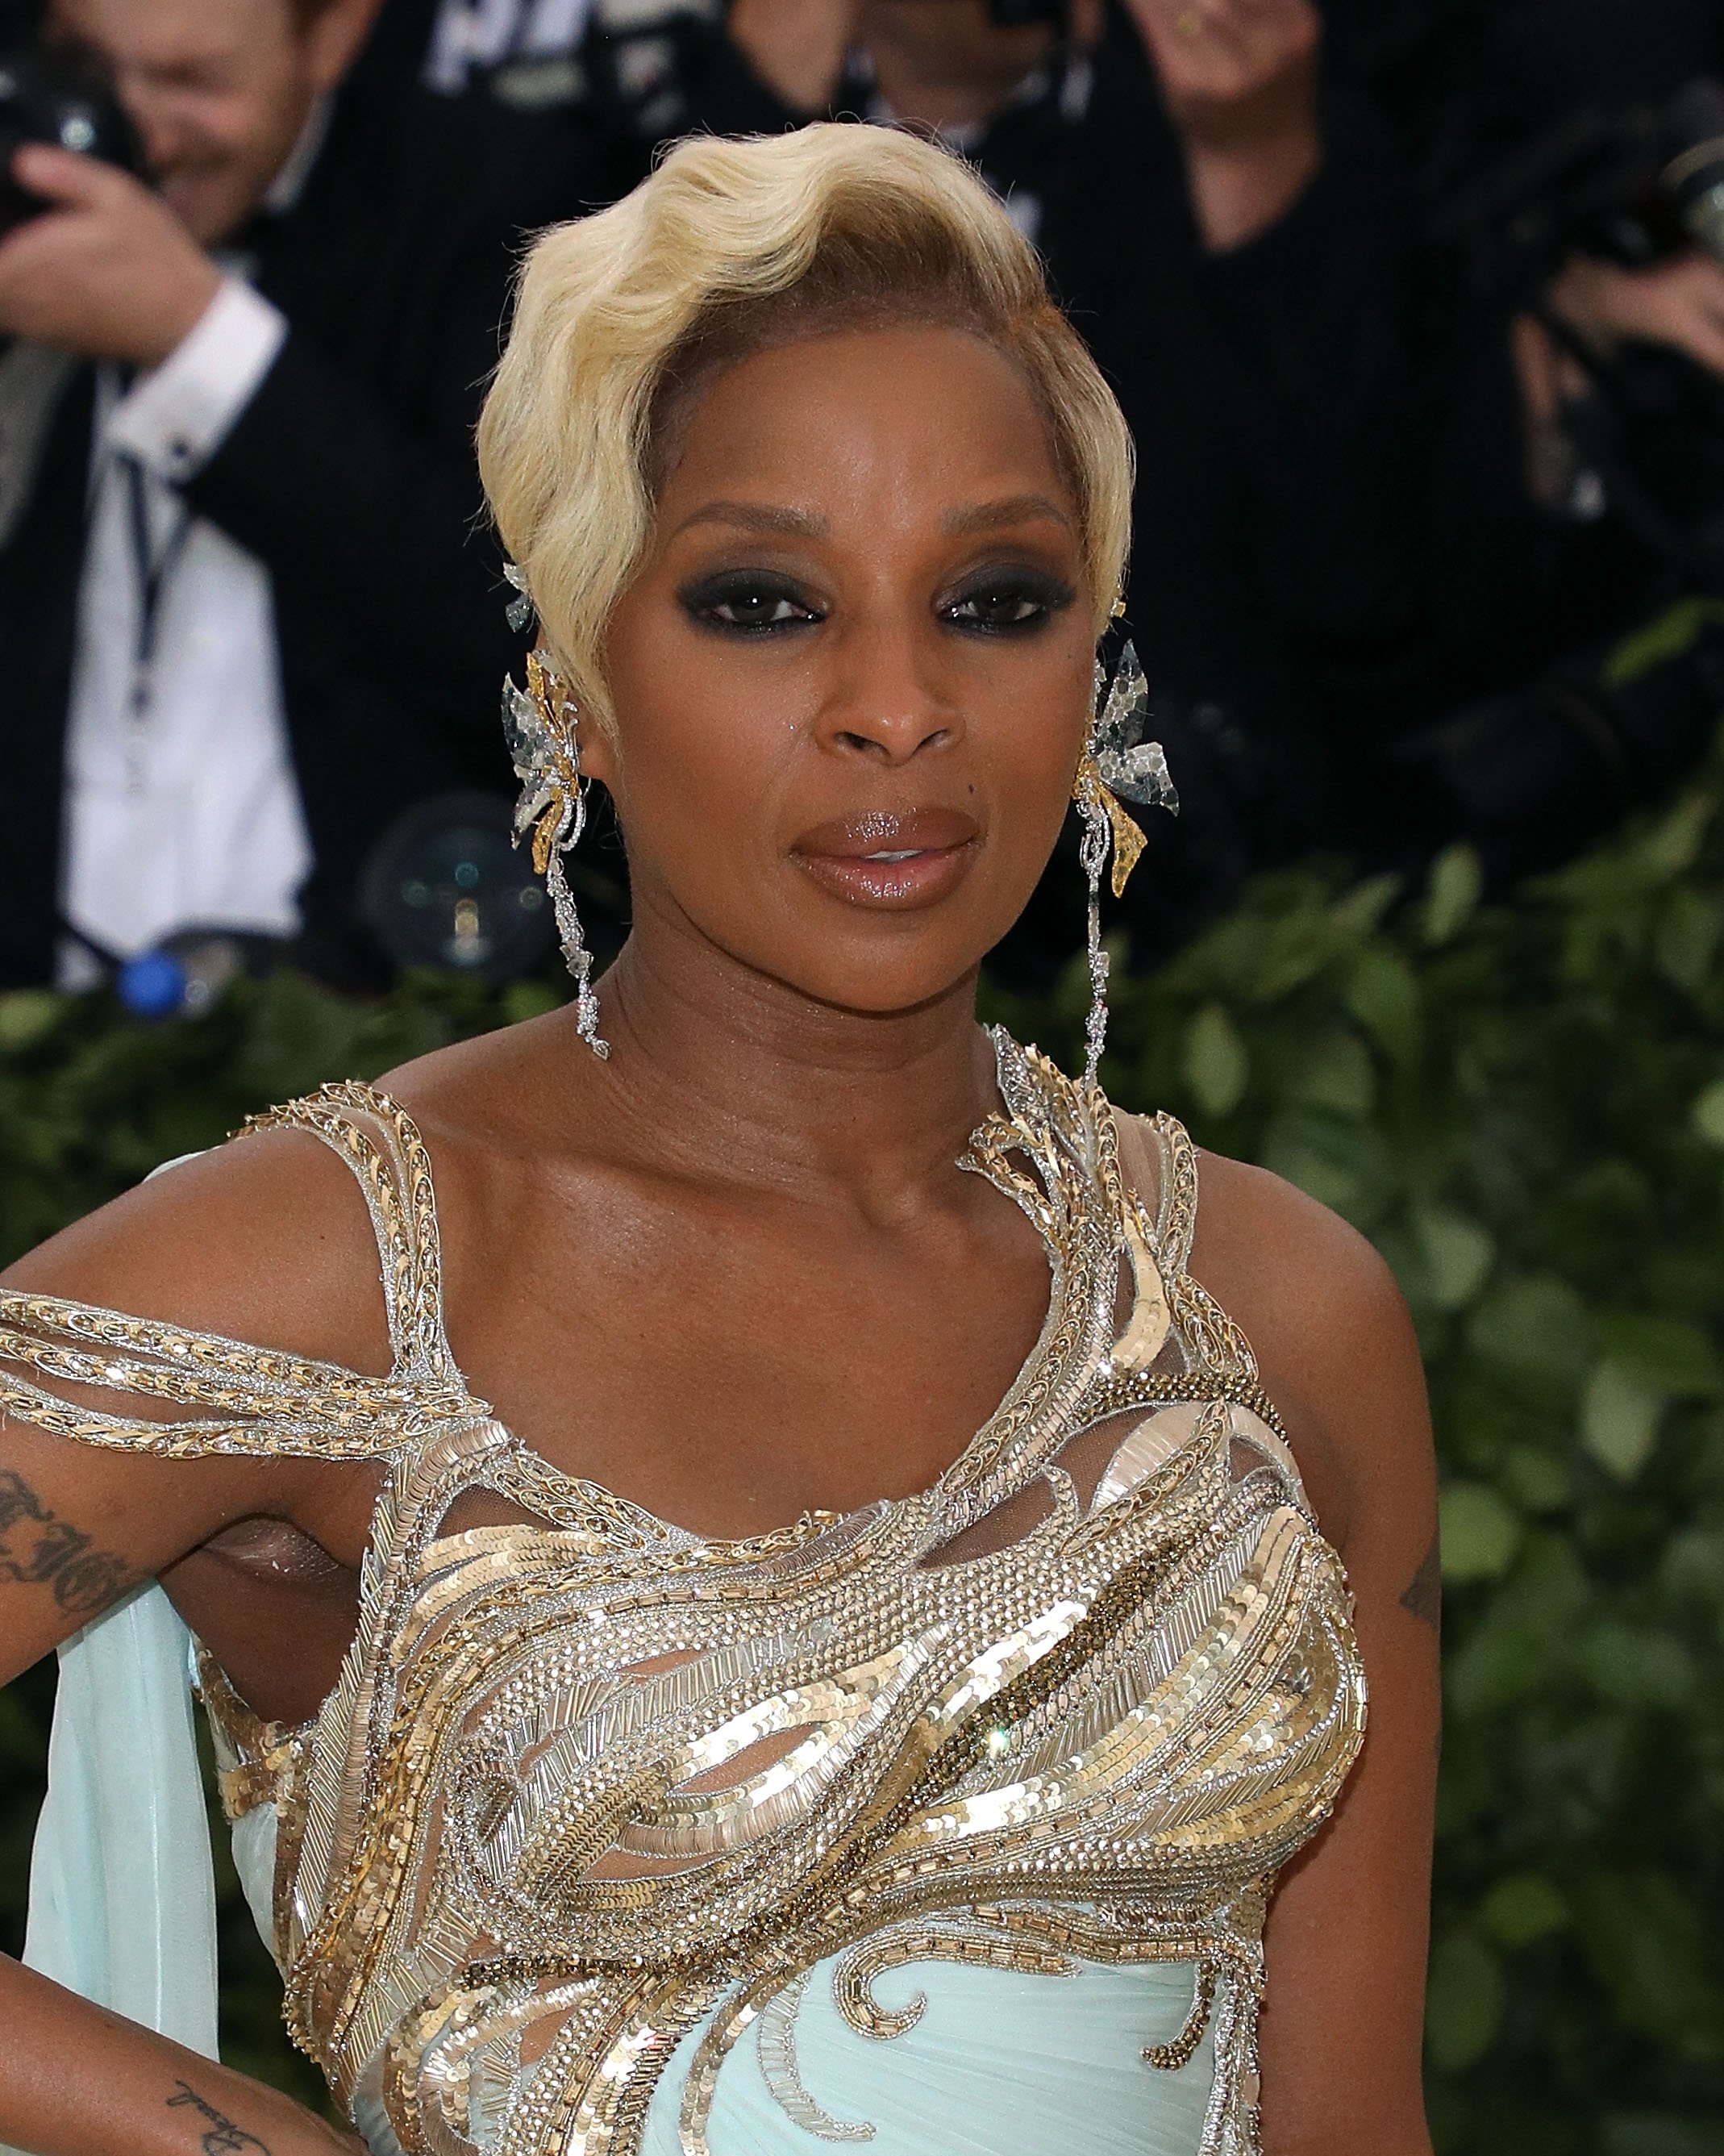 Mary J Blige Looks Alluring Rocking a Black Leather Top & SnakePrint